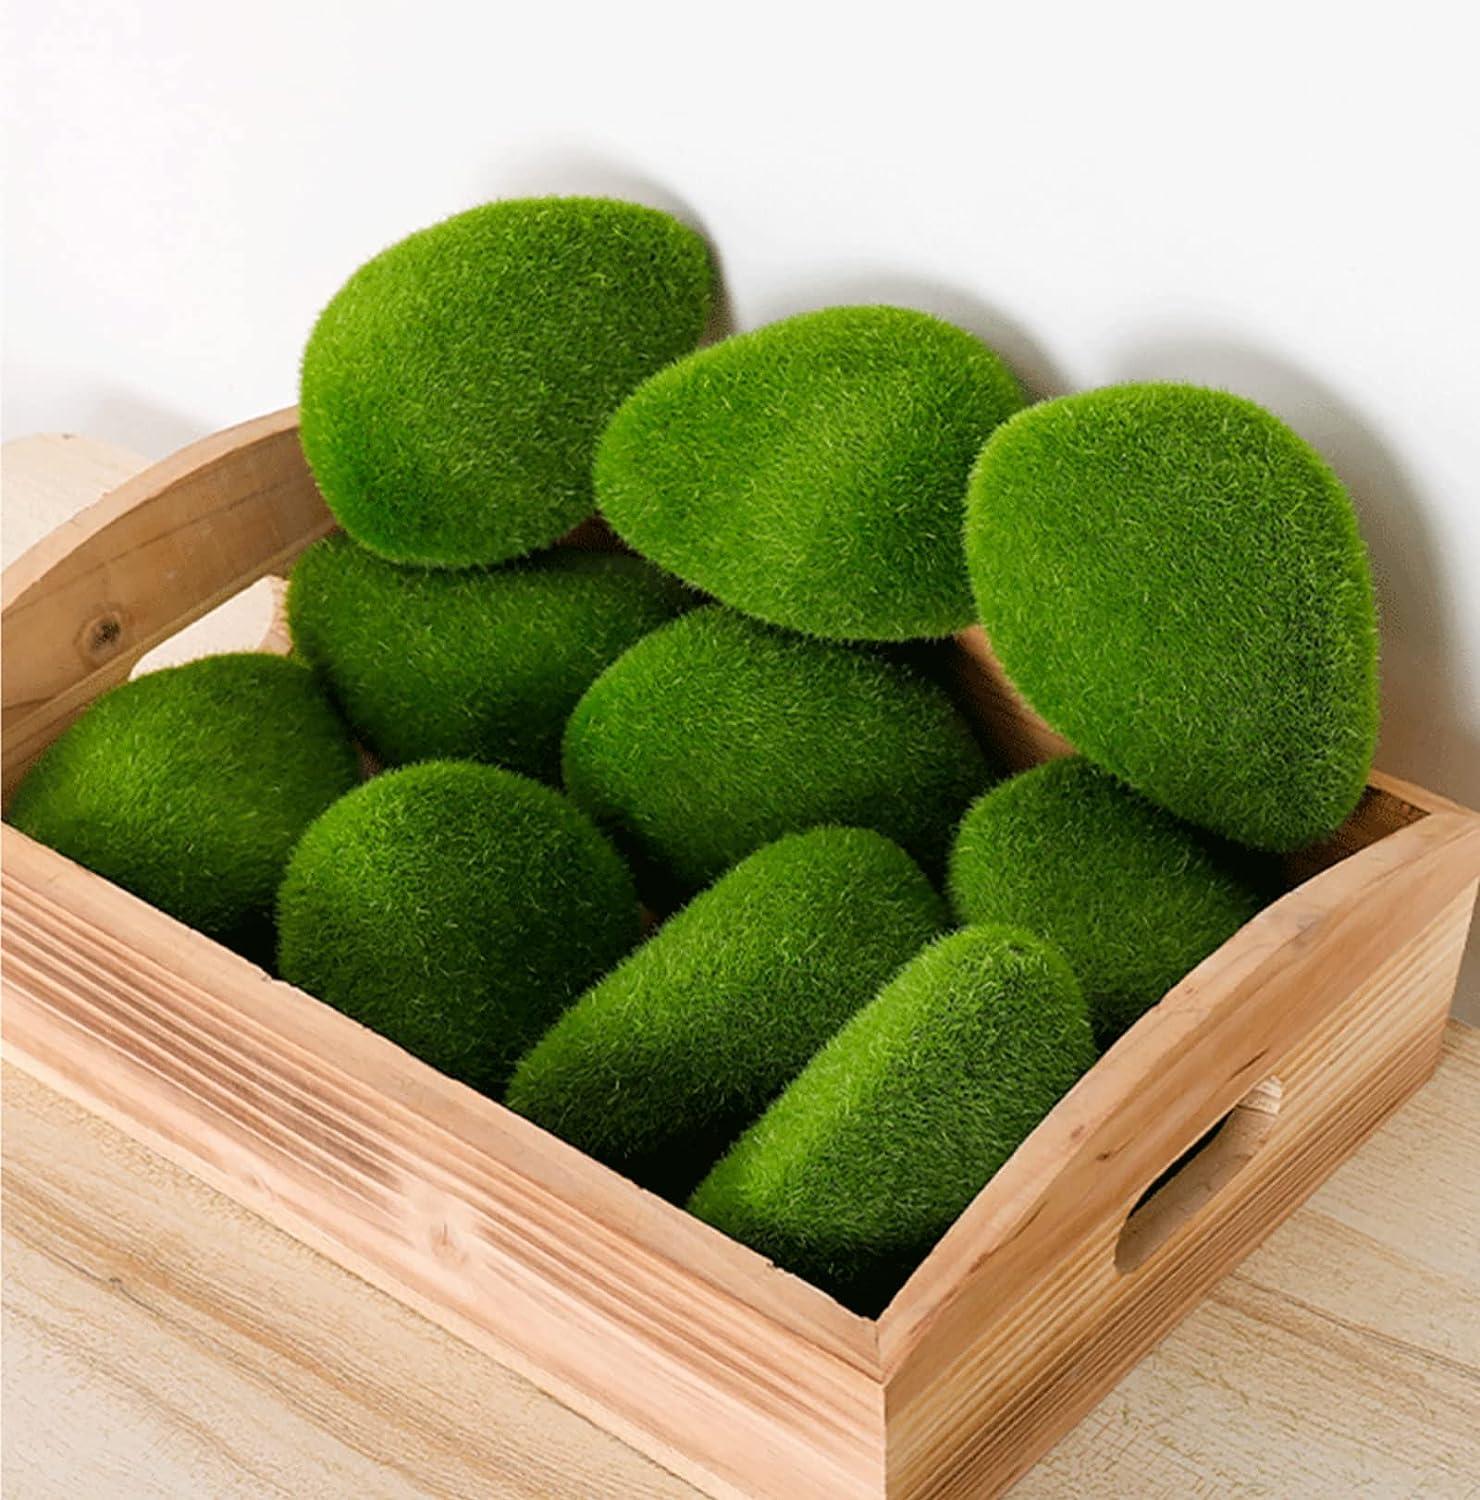 50 Pcs 5 Size Artificial Moss Rocks Decorative Faux Green Moss Covered  Stones Fake Moss Balls for Garden Decor DIY Floral Arrangements Plant Poted  Decoration By TORUBIA 